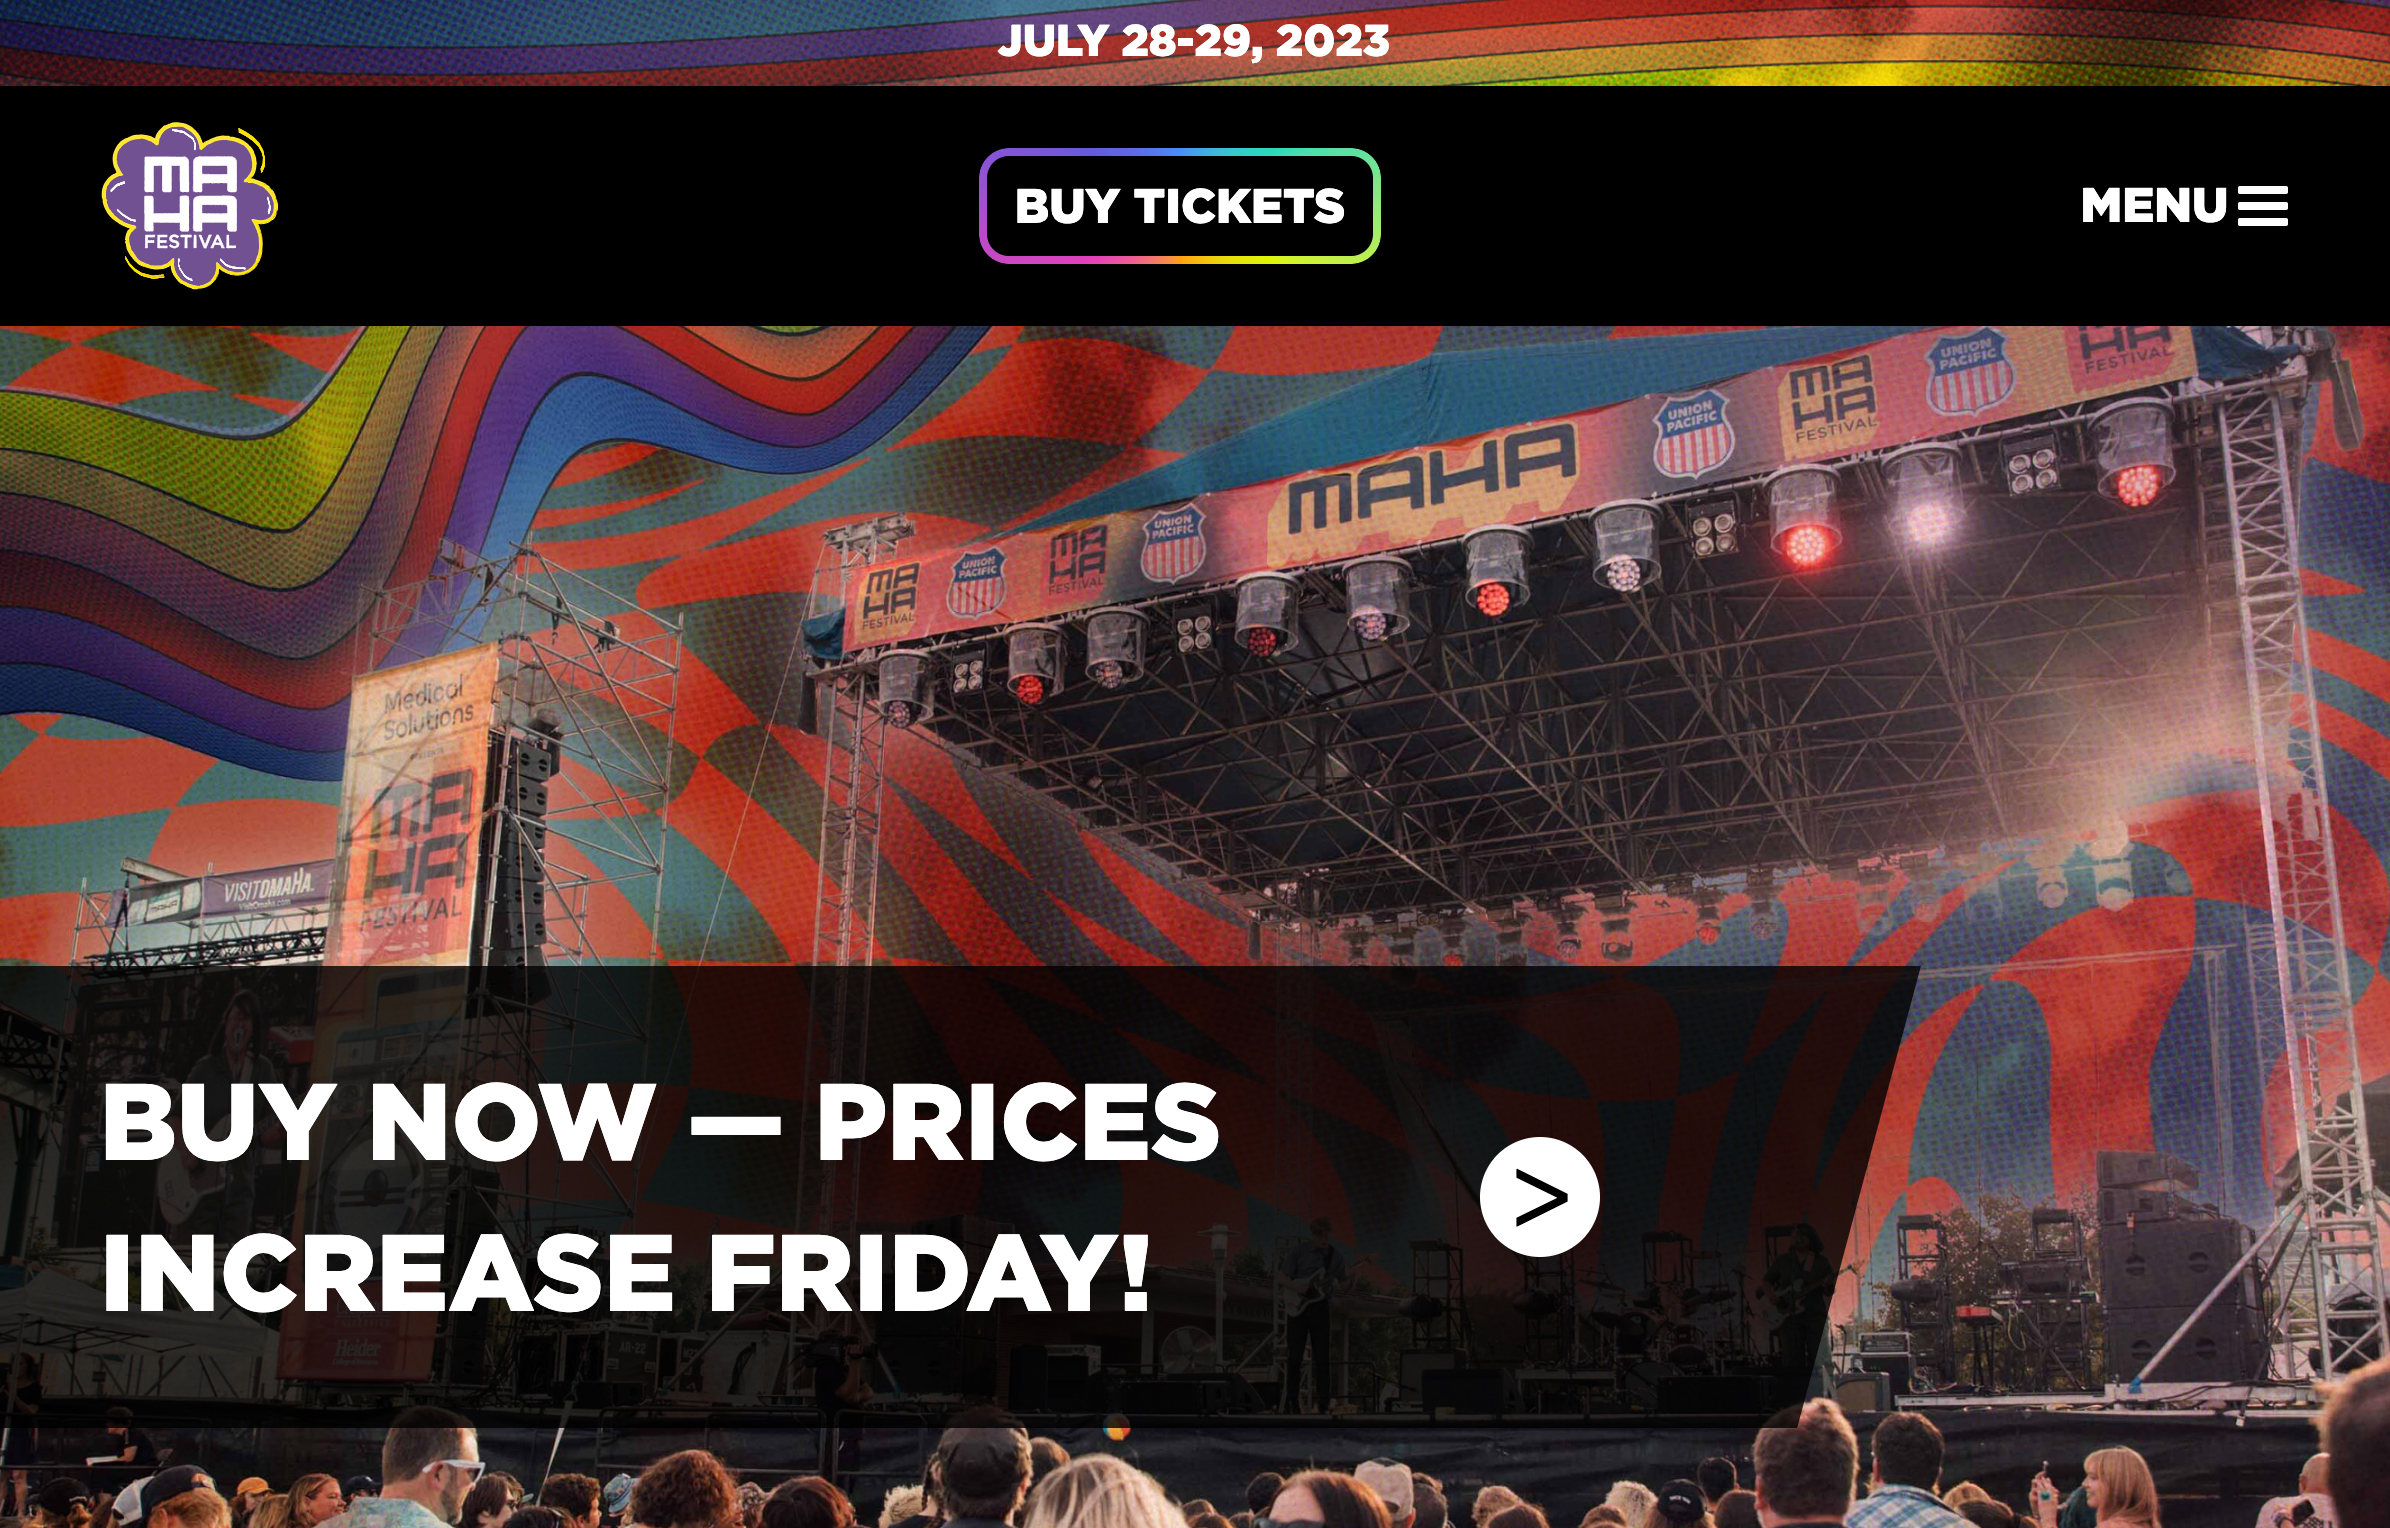 The home page of Maha Music Festival's website, with a Buy Ticket link and festival dates